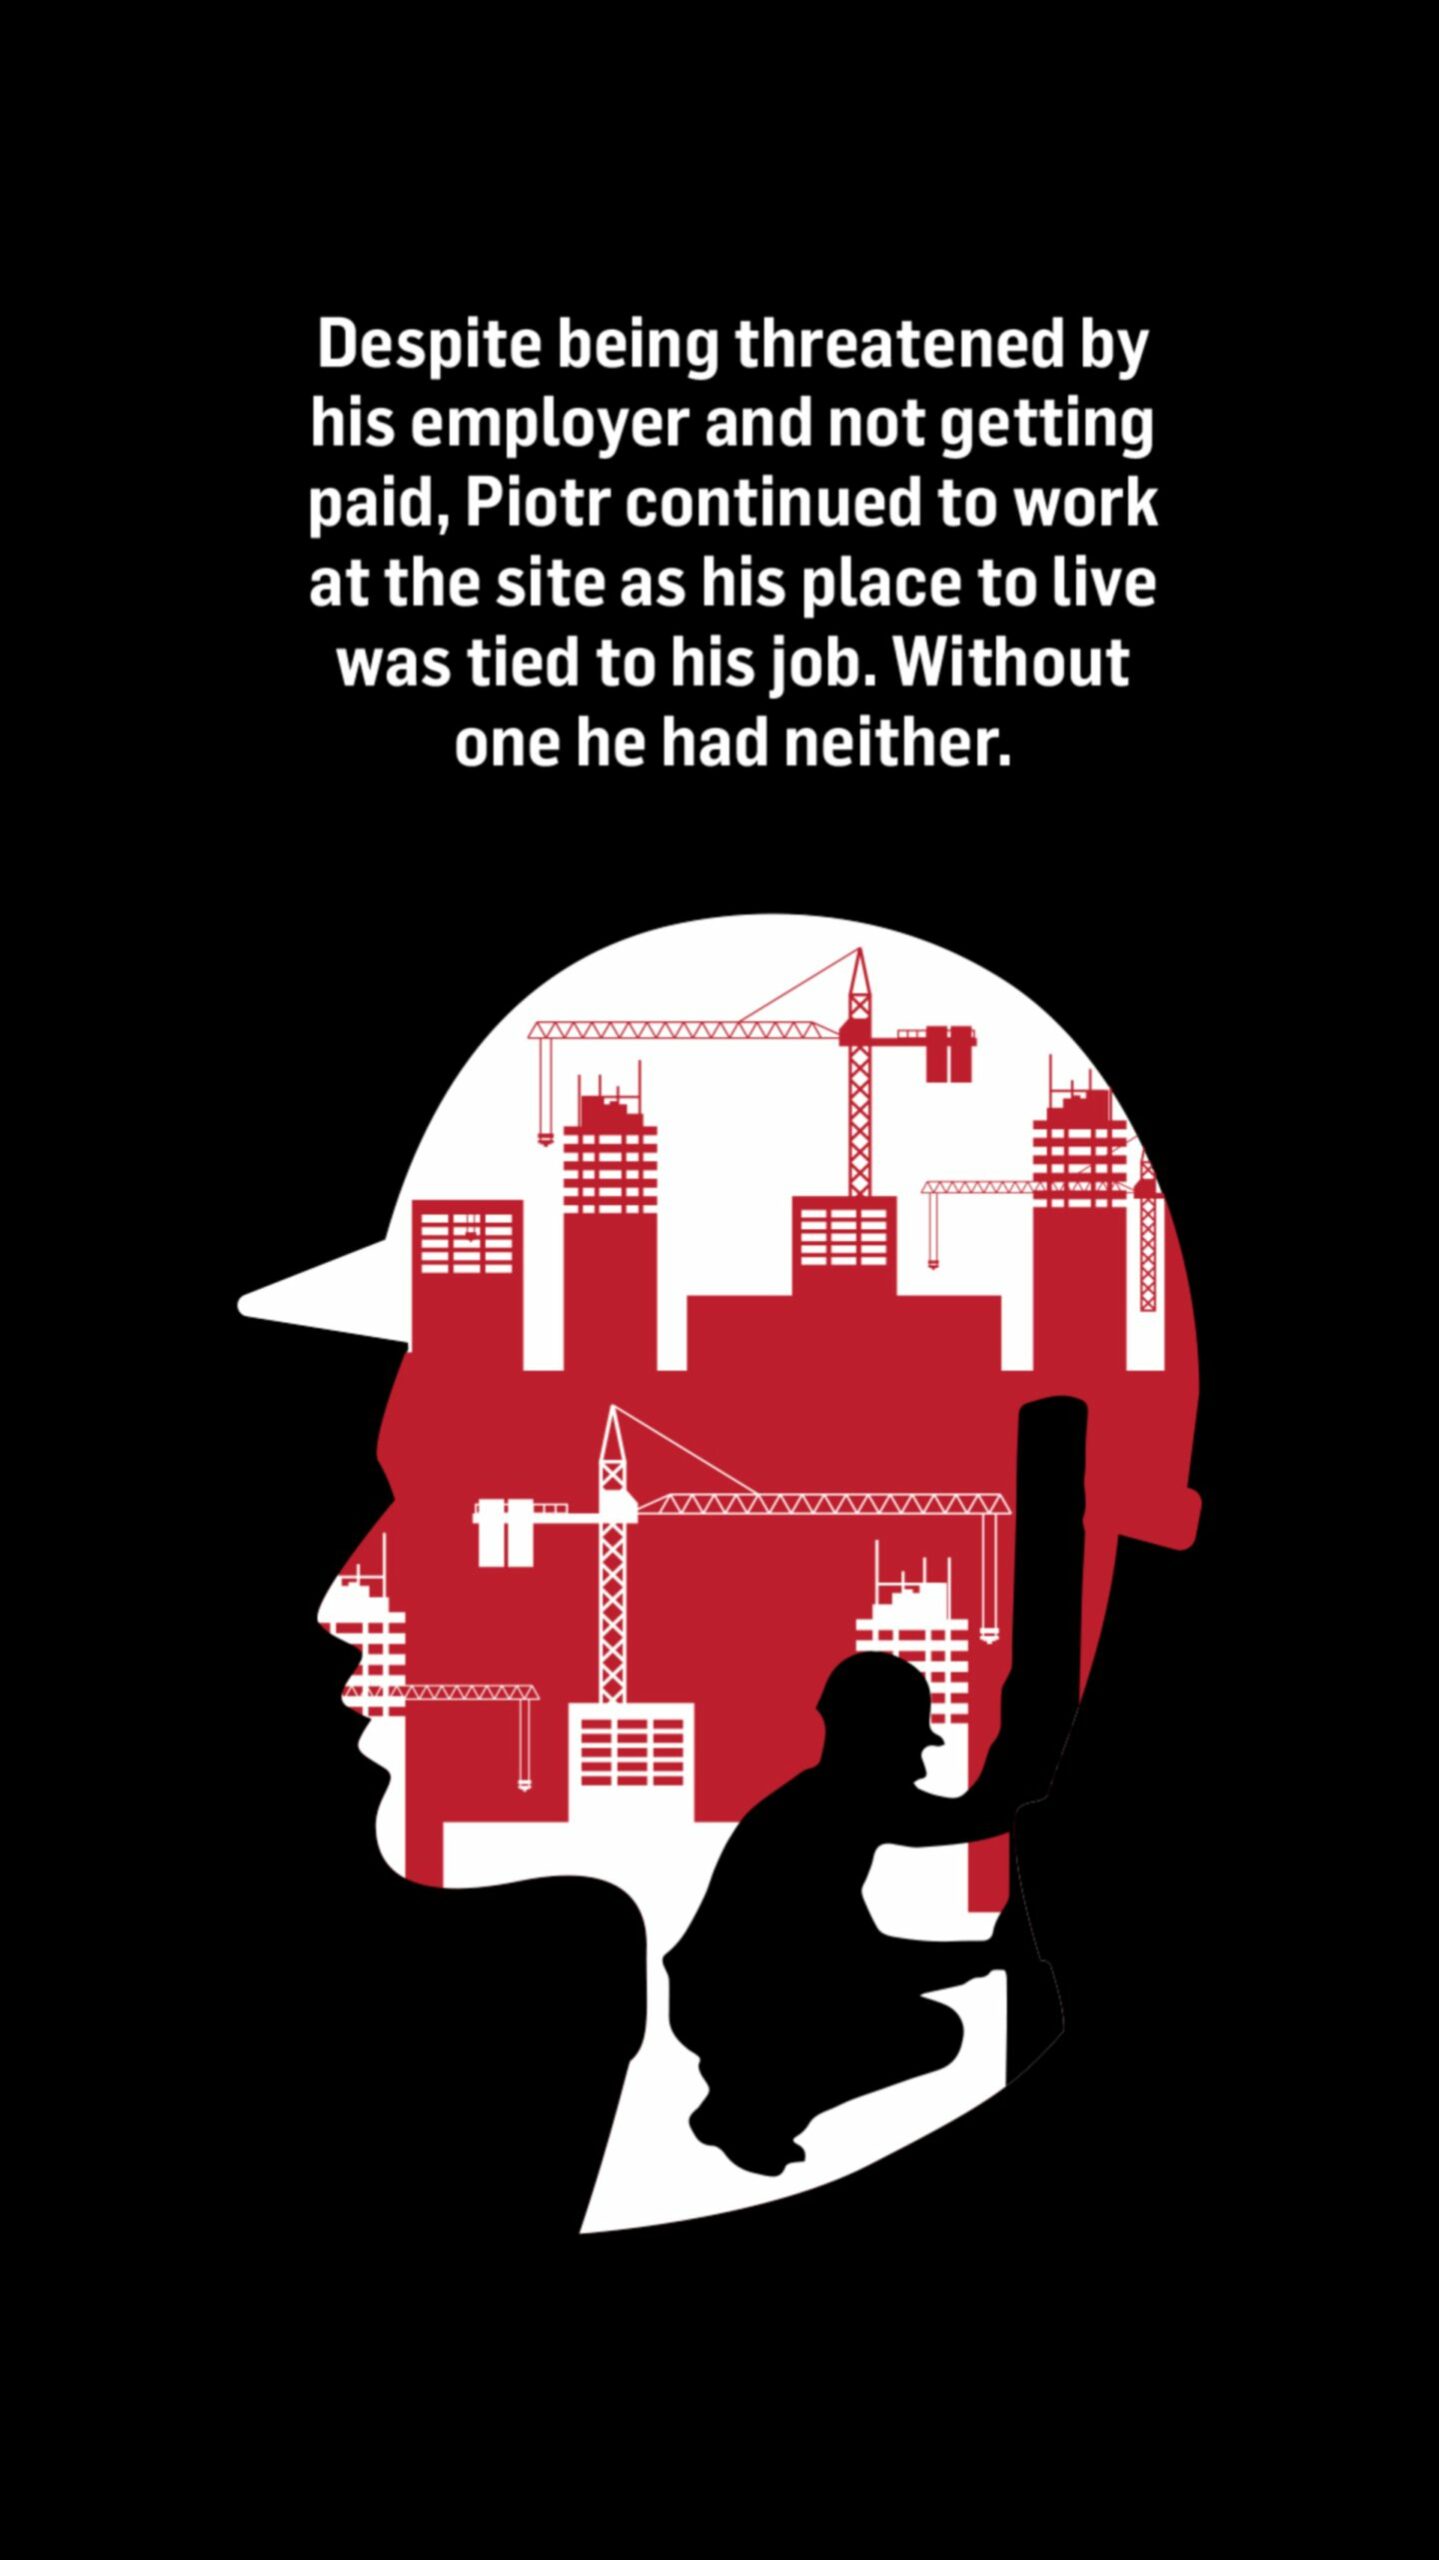 An illustration of a silhouette of a construction worker's head with a construction site visible inside the silhouette. Words above the image read: Despite being threatened by his employer and not getting paid, Piotr continued to work at the site as his place to live was tied to his job.